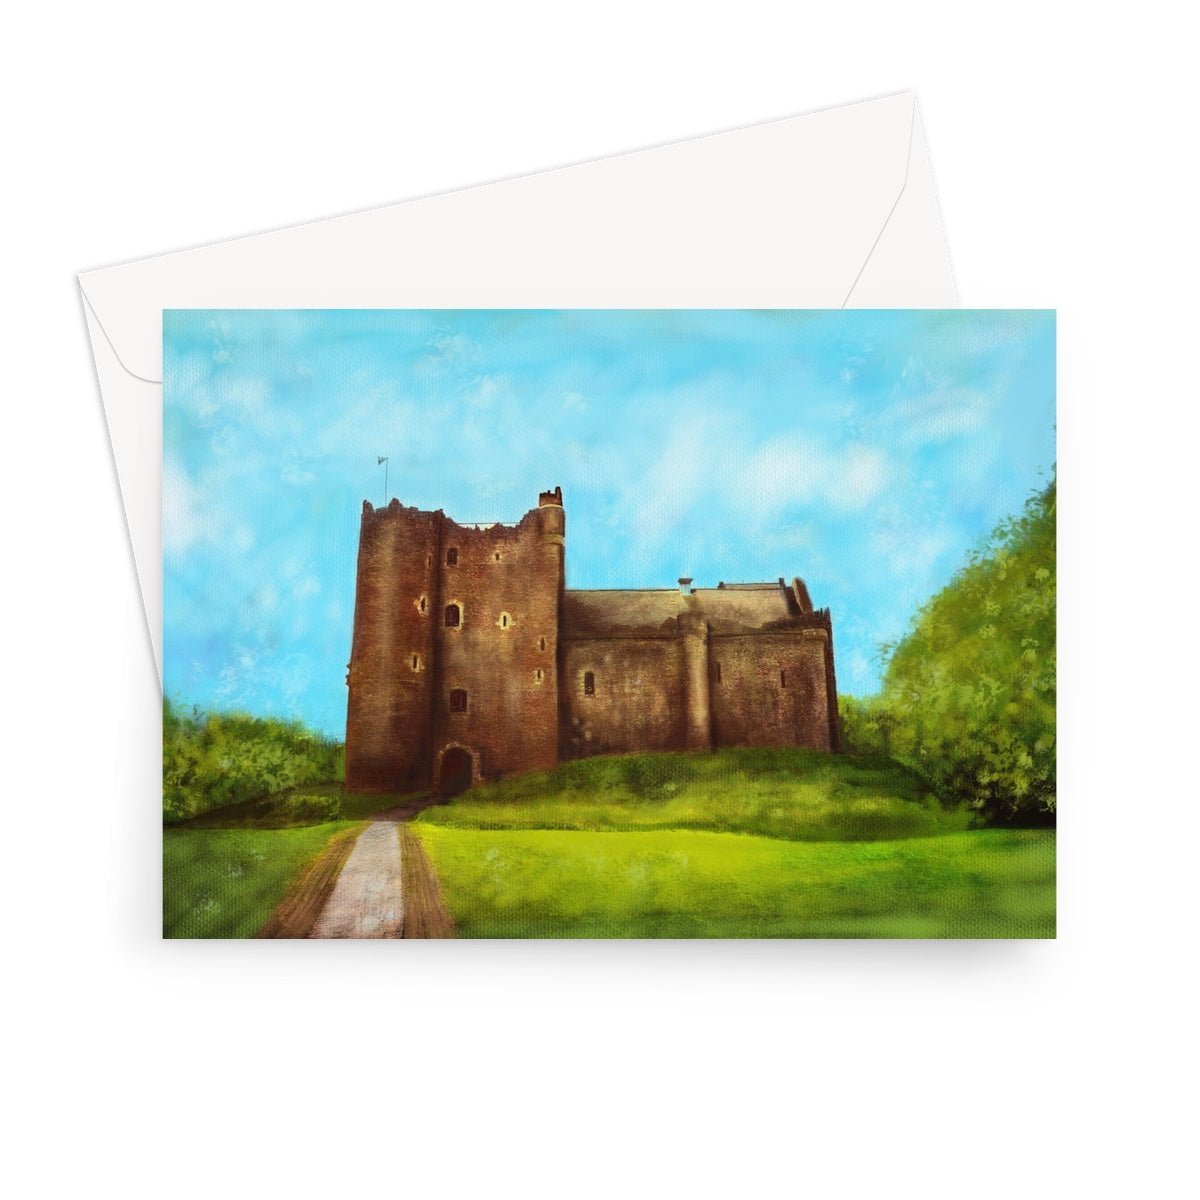 Doune Castle Art Gifts Greeting Card-Greetings Cards-Historic & Iconic Scotland Art Gallery-7"x5"-1 Card-Paintings, Prints, Homeware, Art Gifts From Scotland By Scottish Artist Kevin Hunter